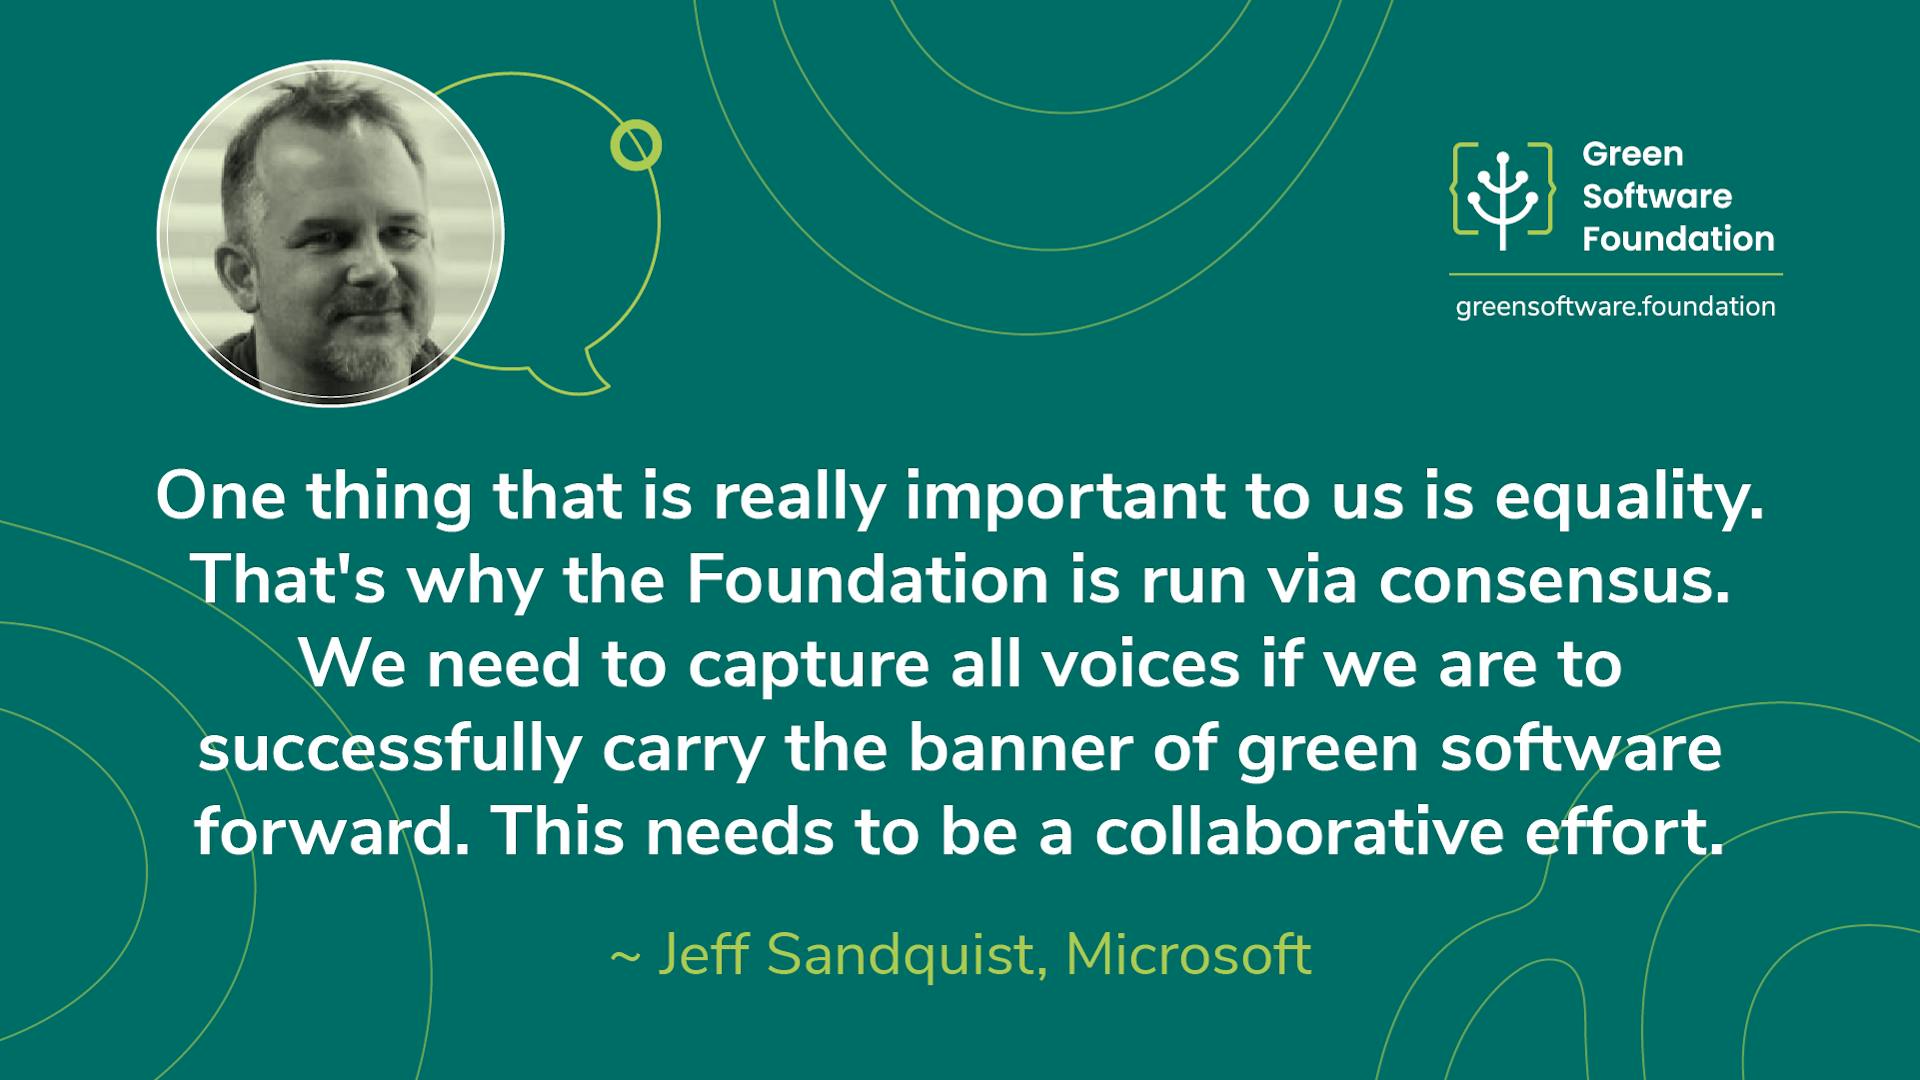 Jeff-sandquist-microsoft-quote-about-green-software-foundation